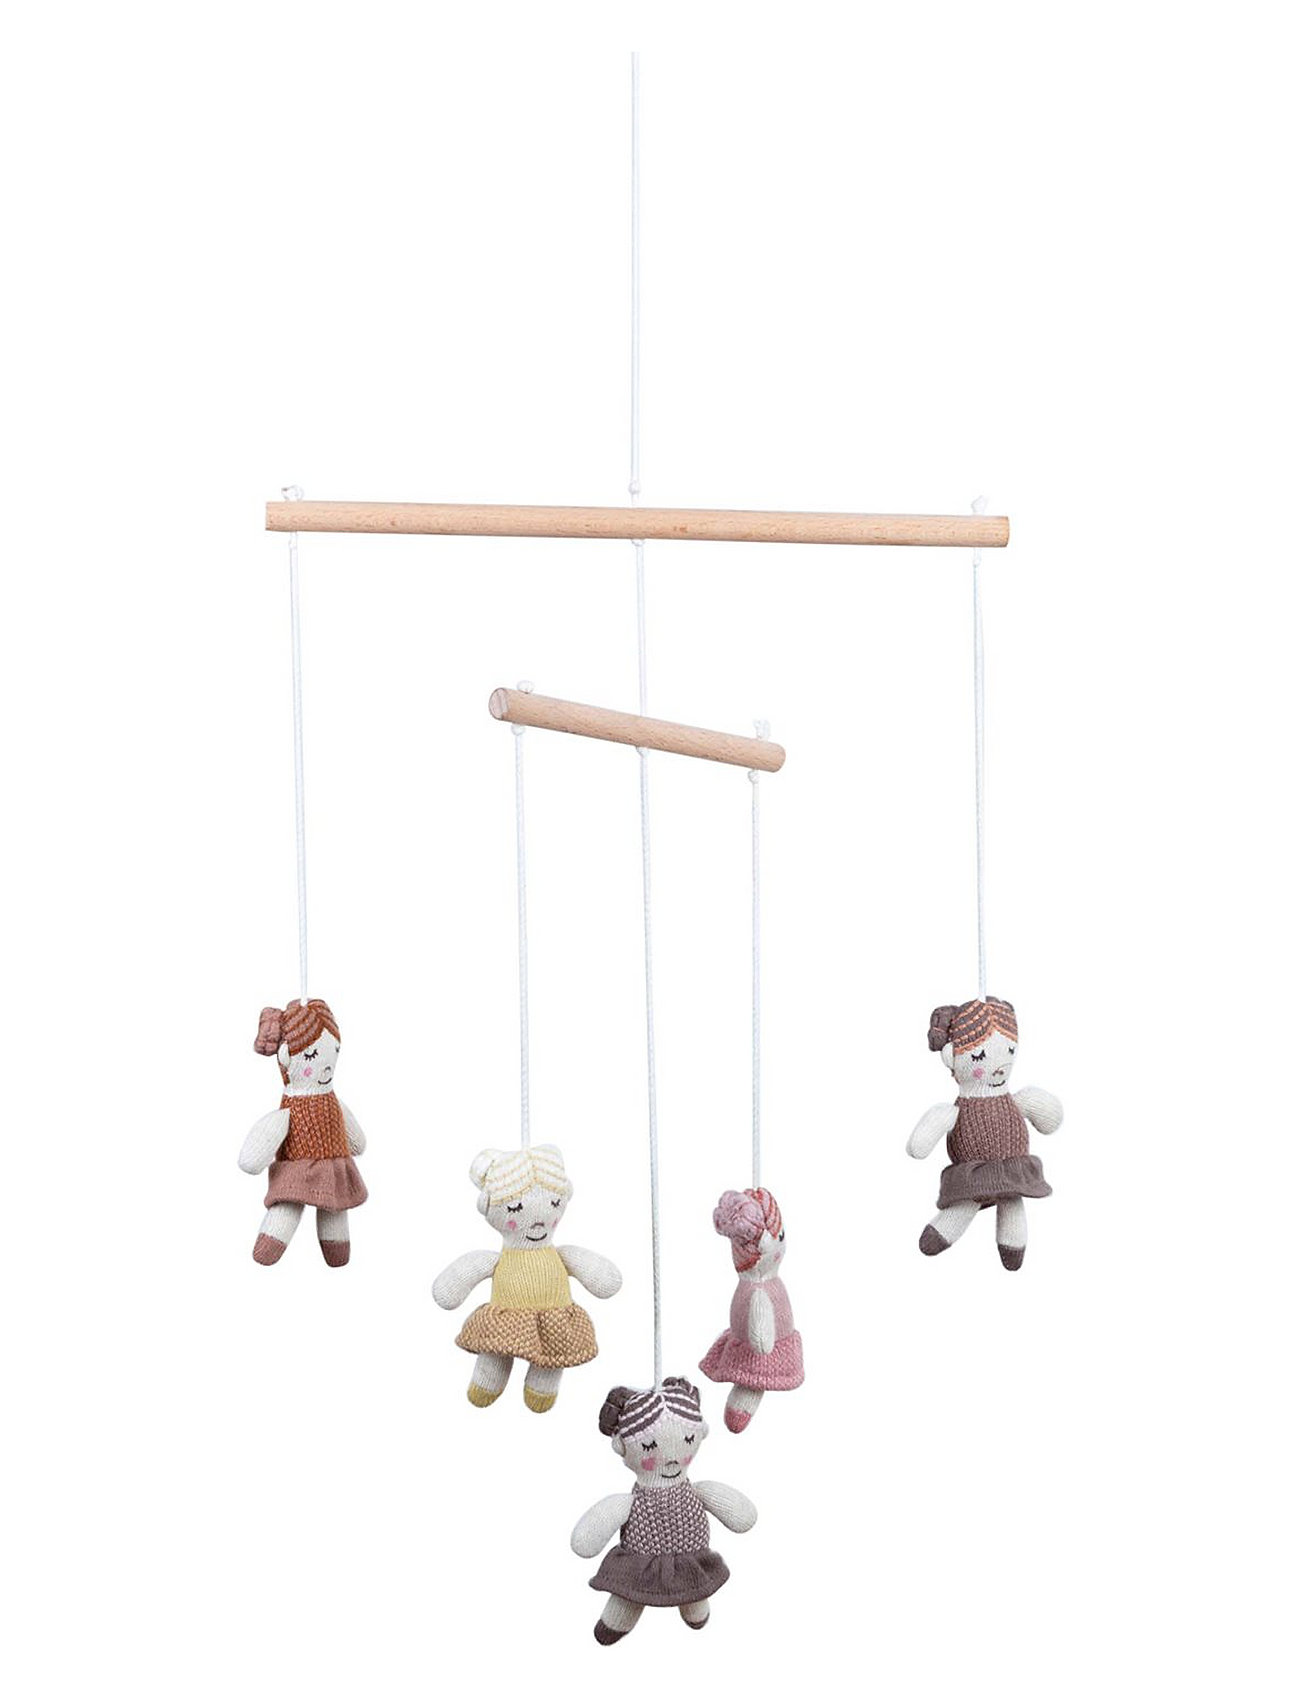 Hanging Mobile, Dolls, Multi Baby & Maternity Baby Sleep Mobile Clouds Multi/patterned Smallstuff